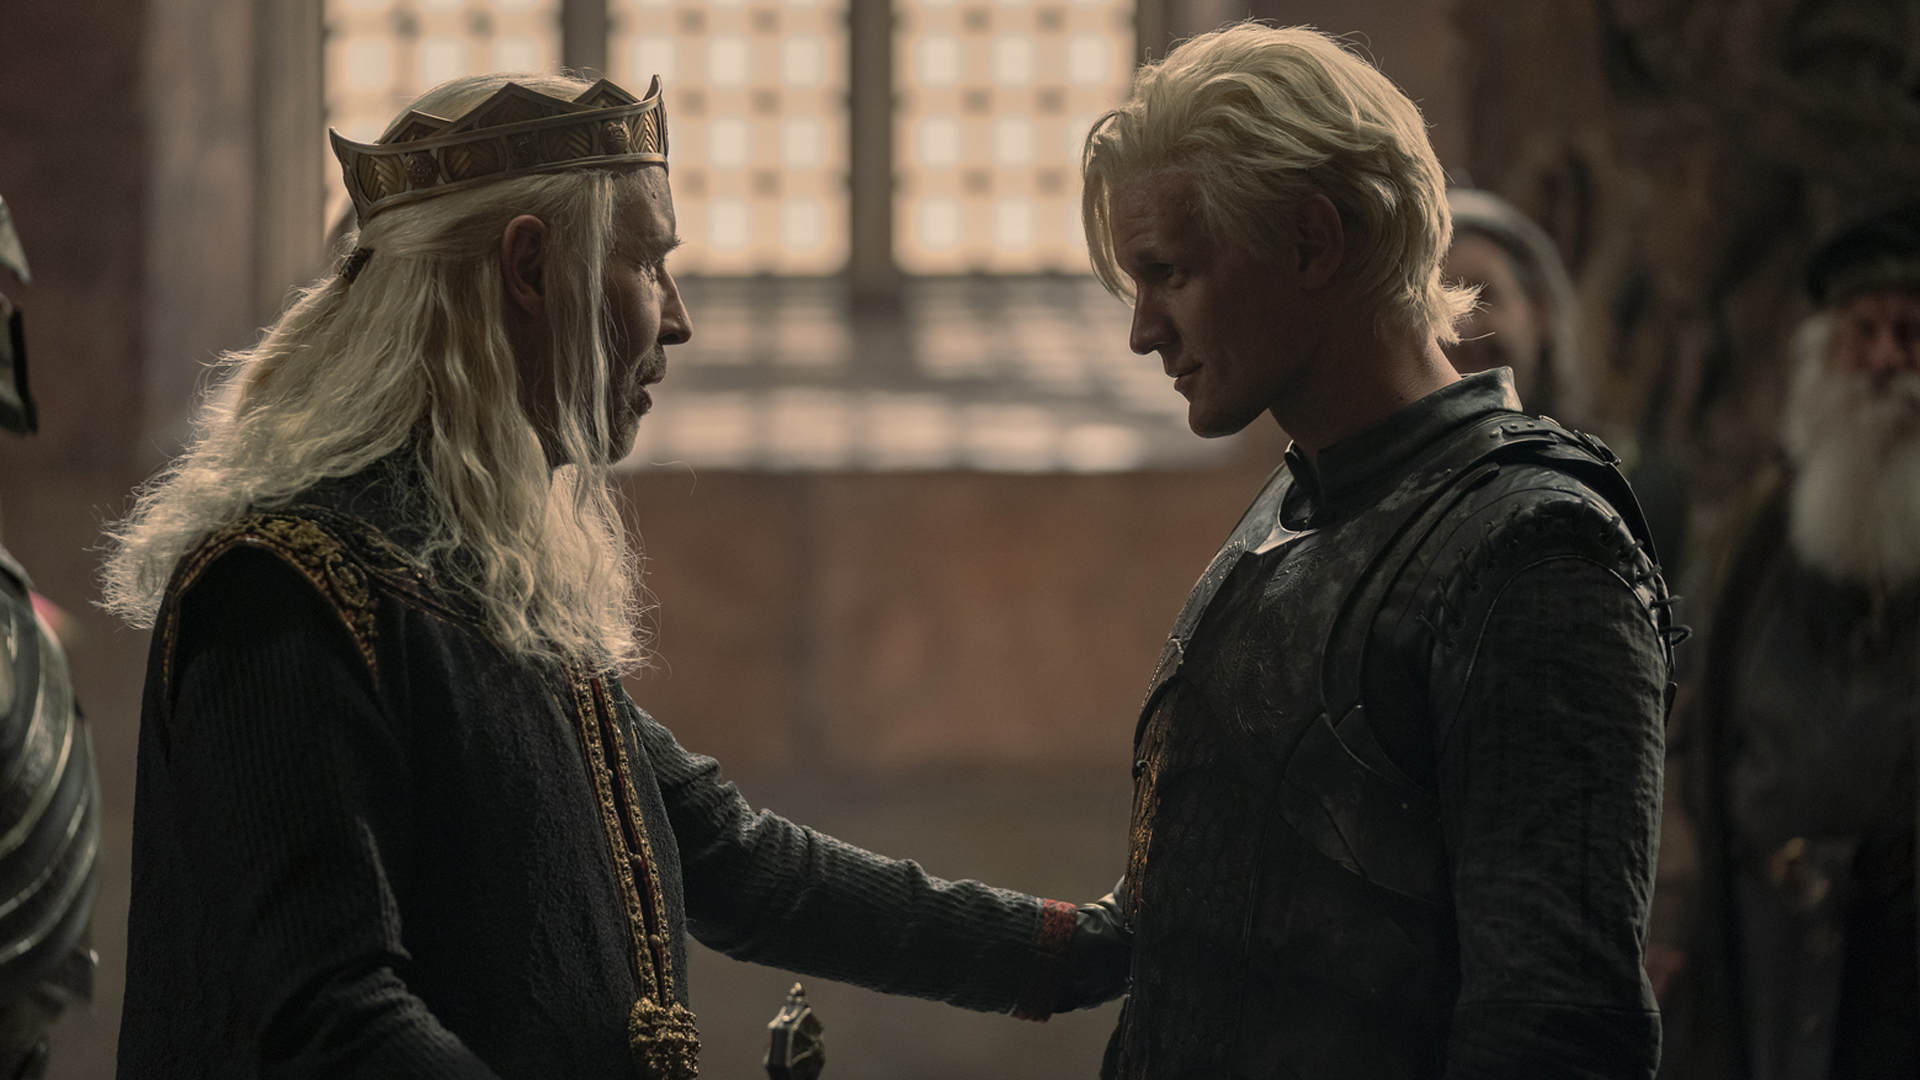 King Viserys I shares a tender moment with Prince Daemon in his throne room in House of the Dragon episode 4